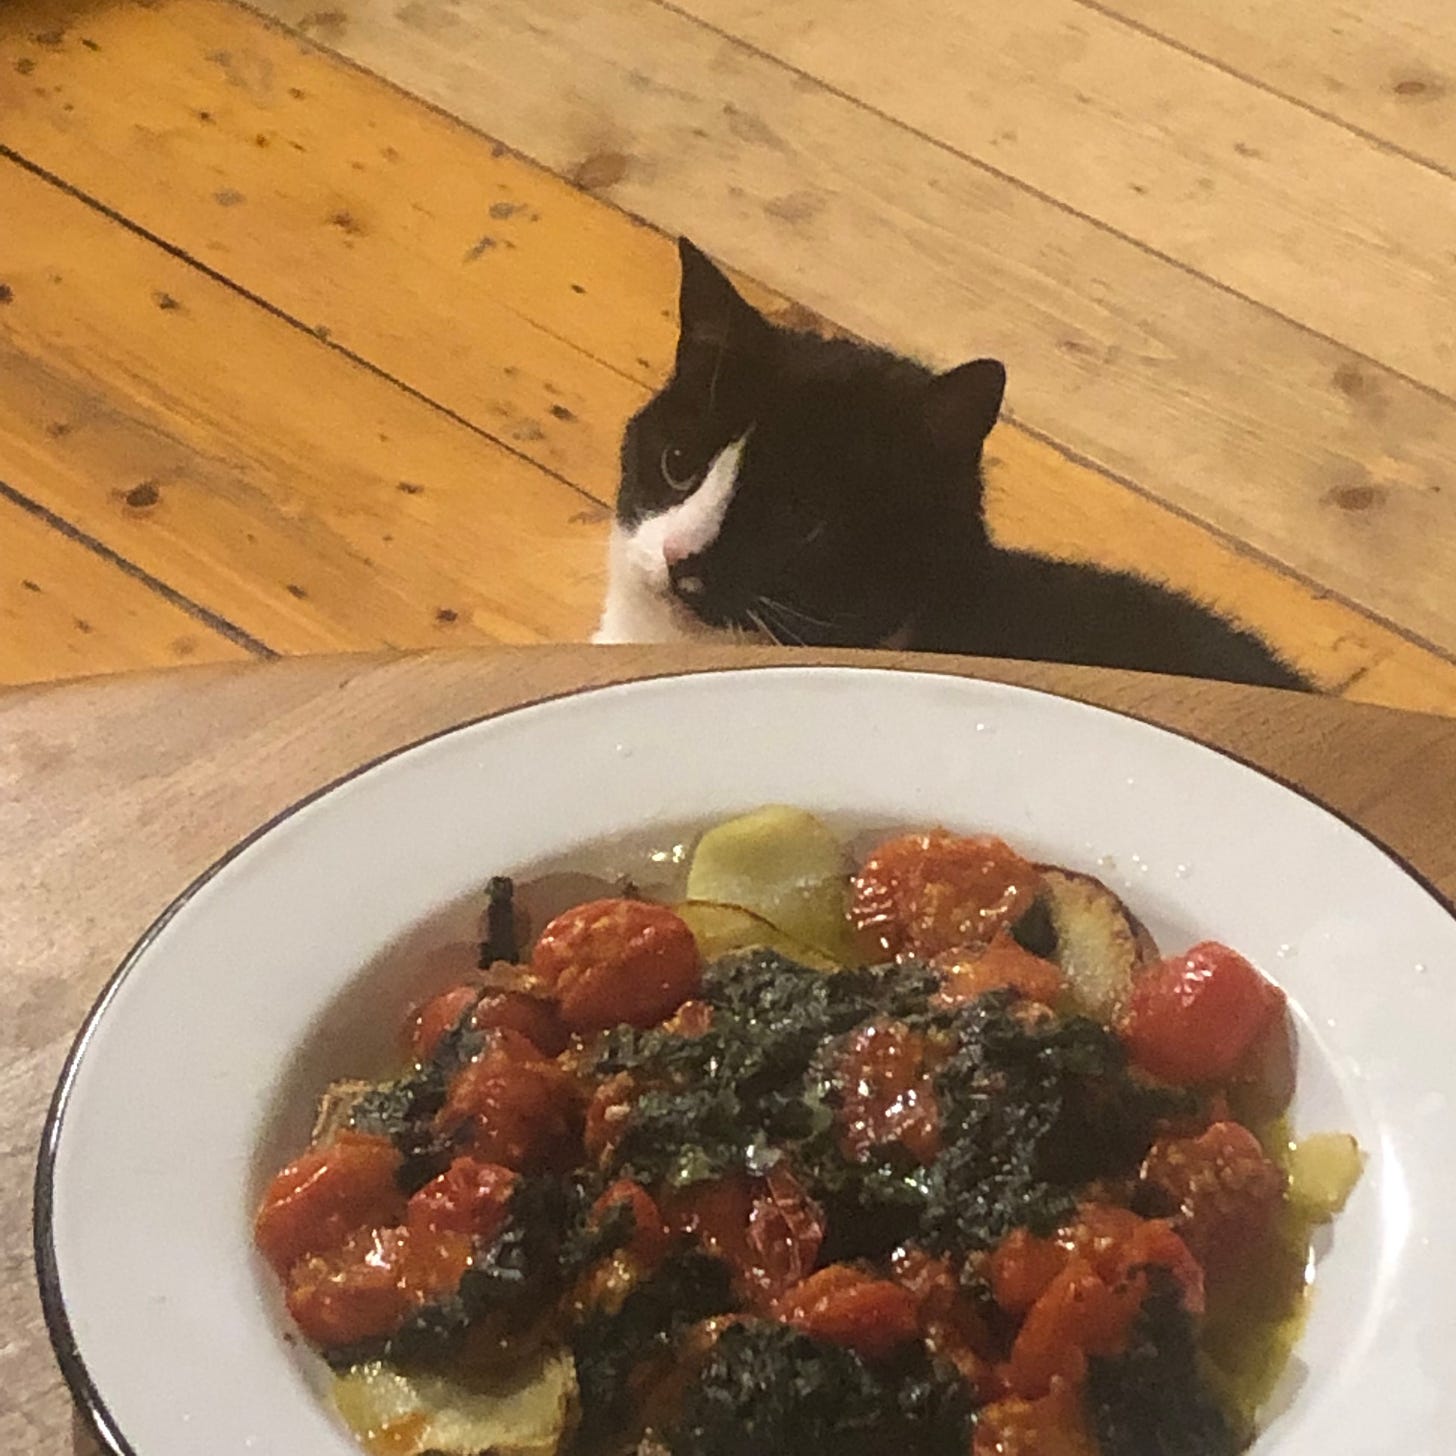 A plate of food in the foreground on a table - tomatoes, some green, some potatoes, a mass. Behind, gazing at something out of shot to the left, a black and white cat. 